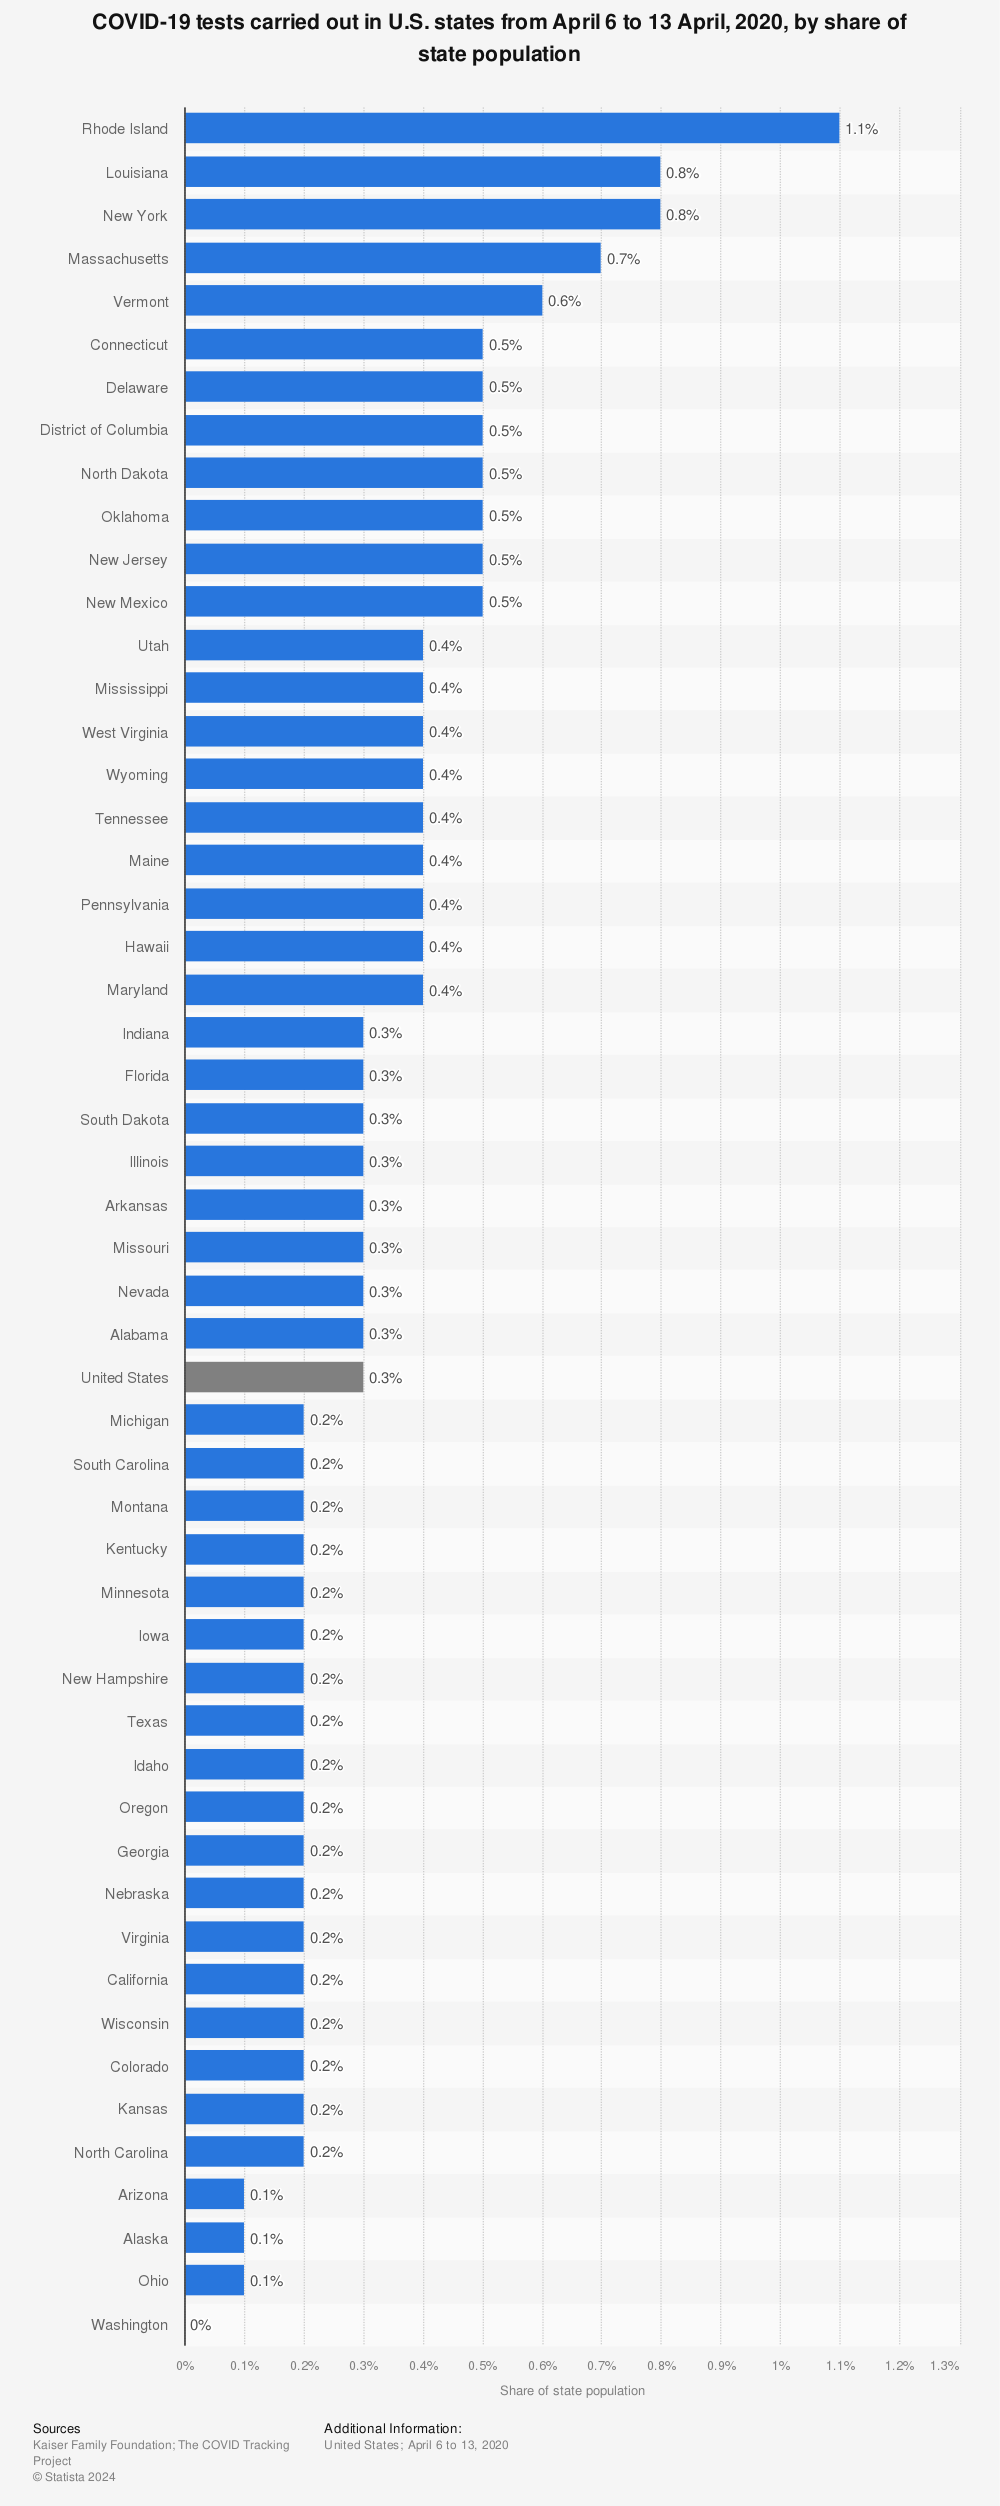 Statistic: COVID-19 tests carried out in U.S. states from April 6 to 13 April, 2020, by share of state population | Statista